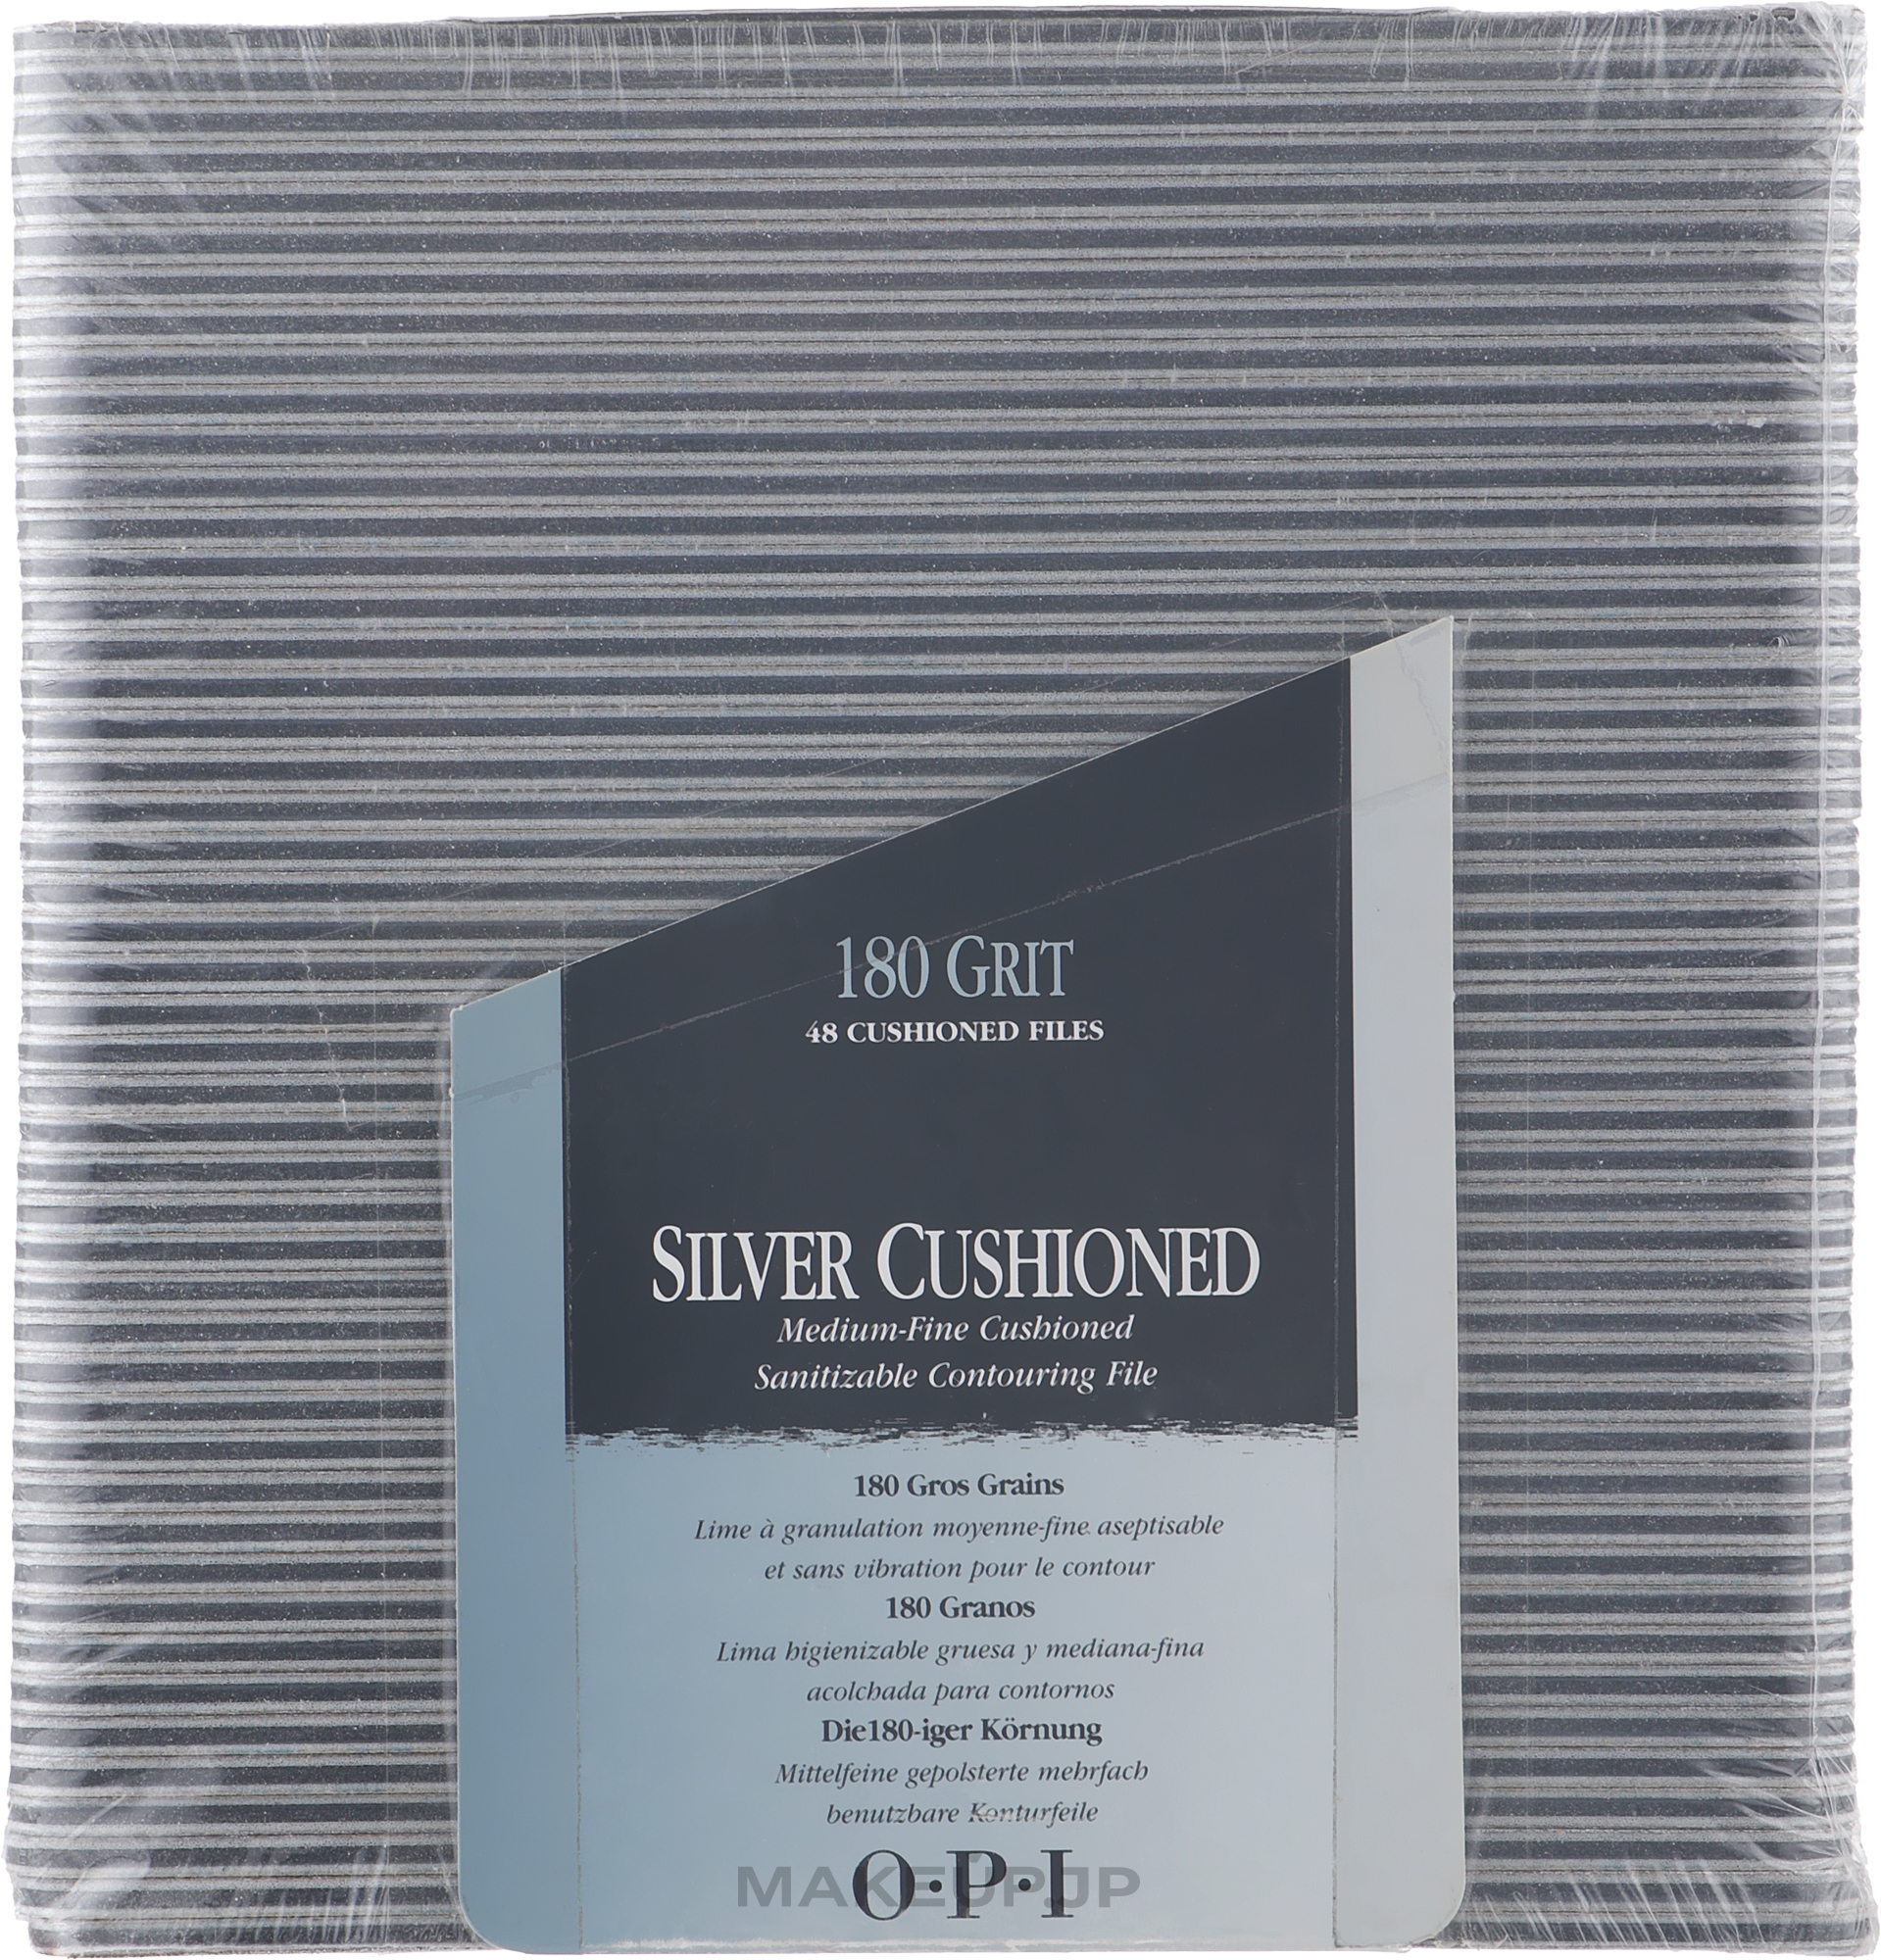 Cushioned File 180 grit - OPI Silver Cushioned File — photo 48 szt.